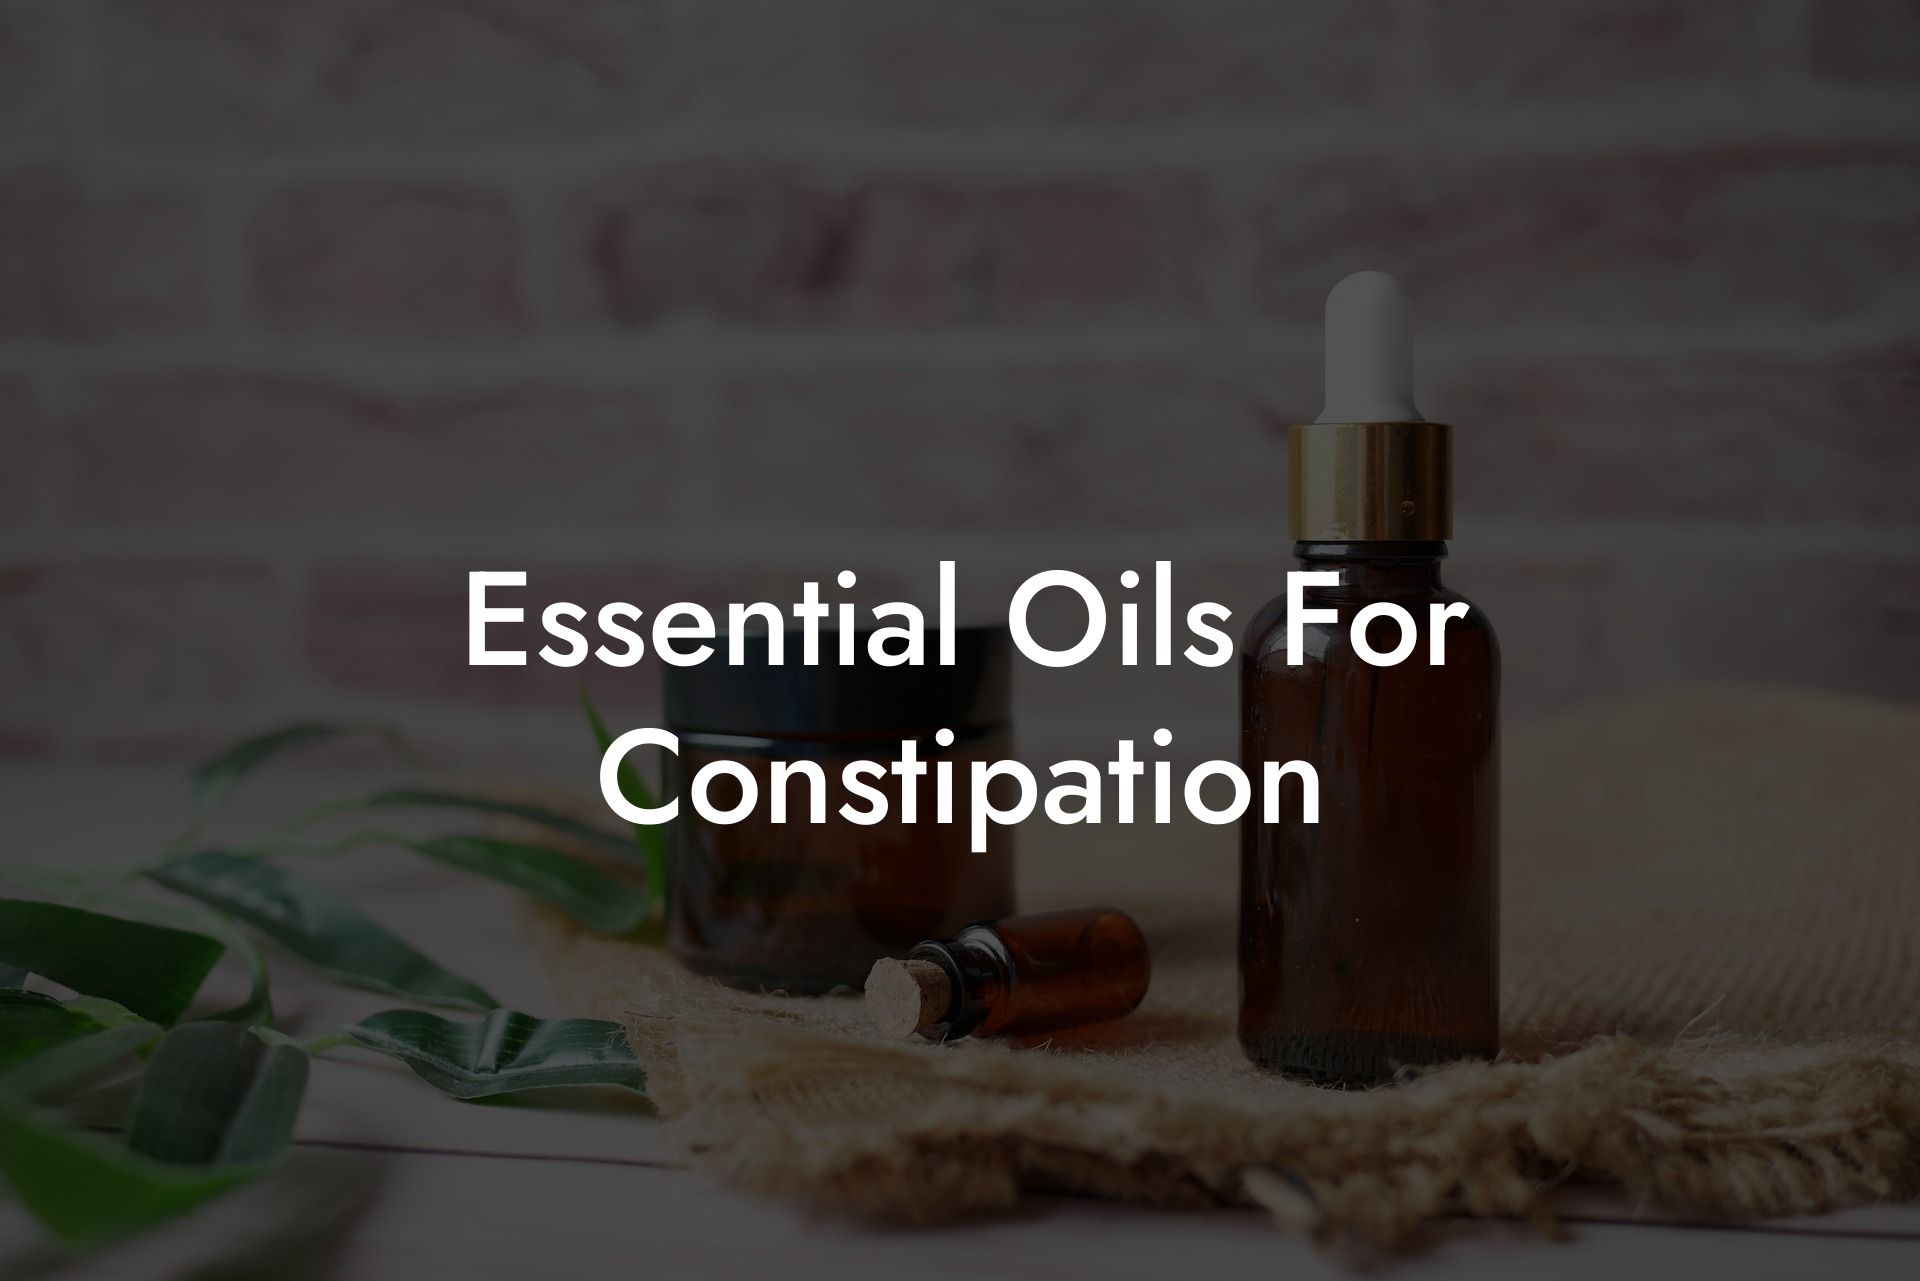 Essential Oils For Constipation